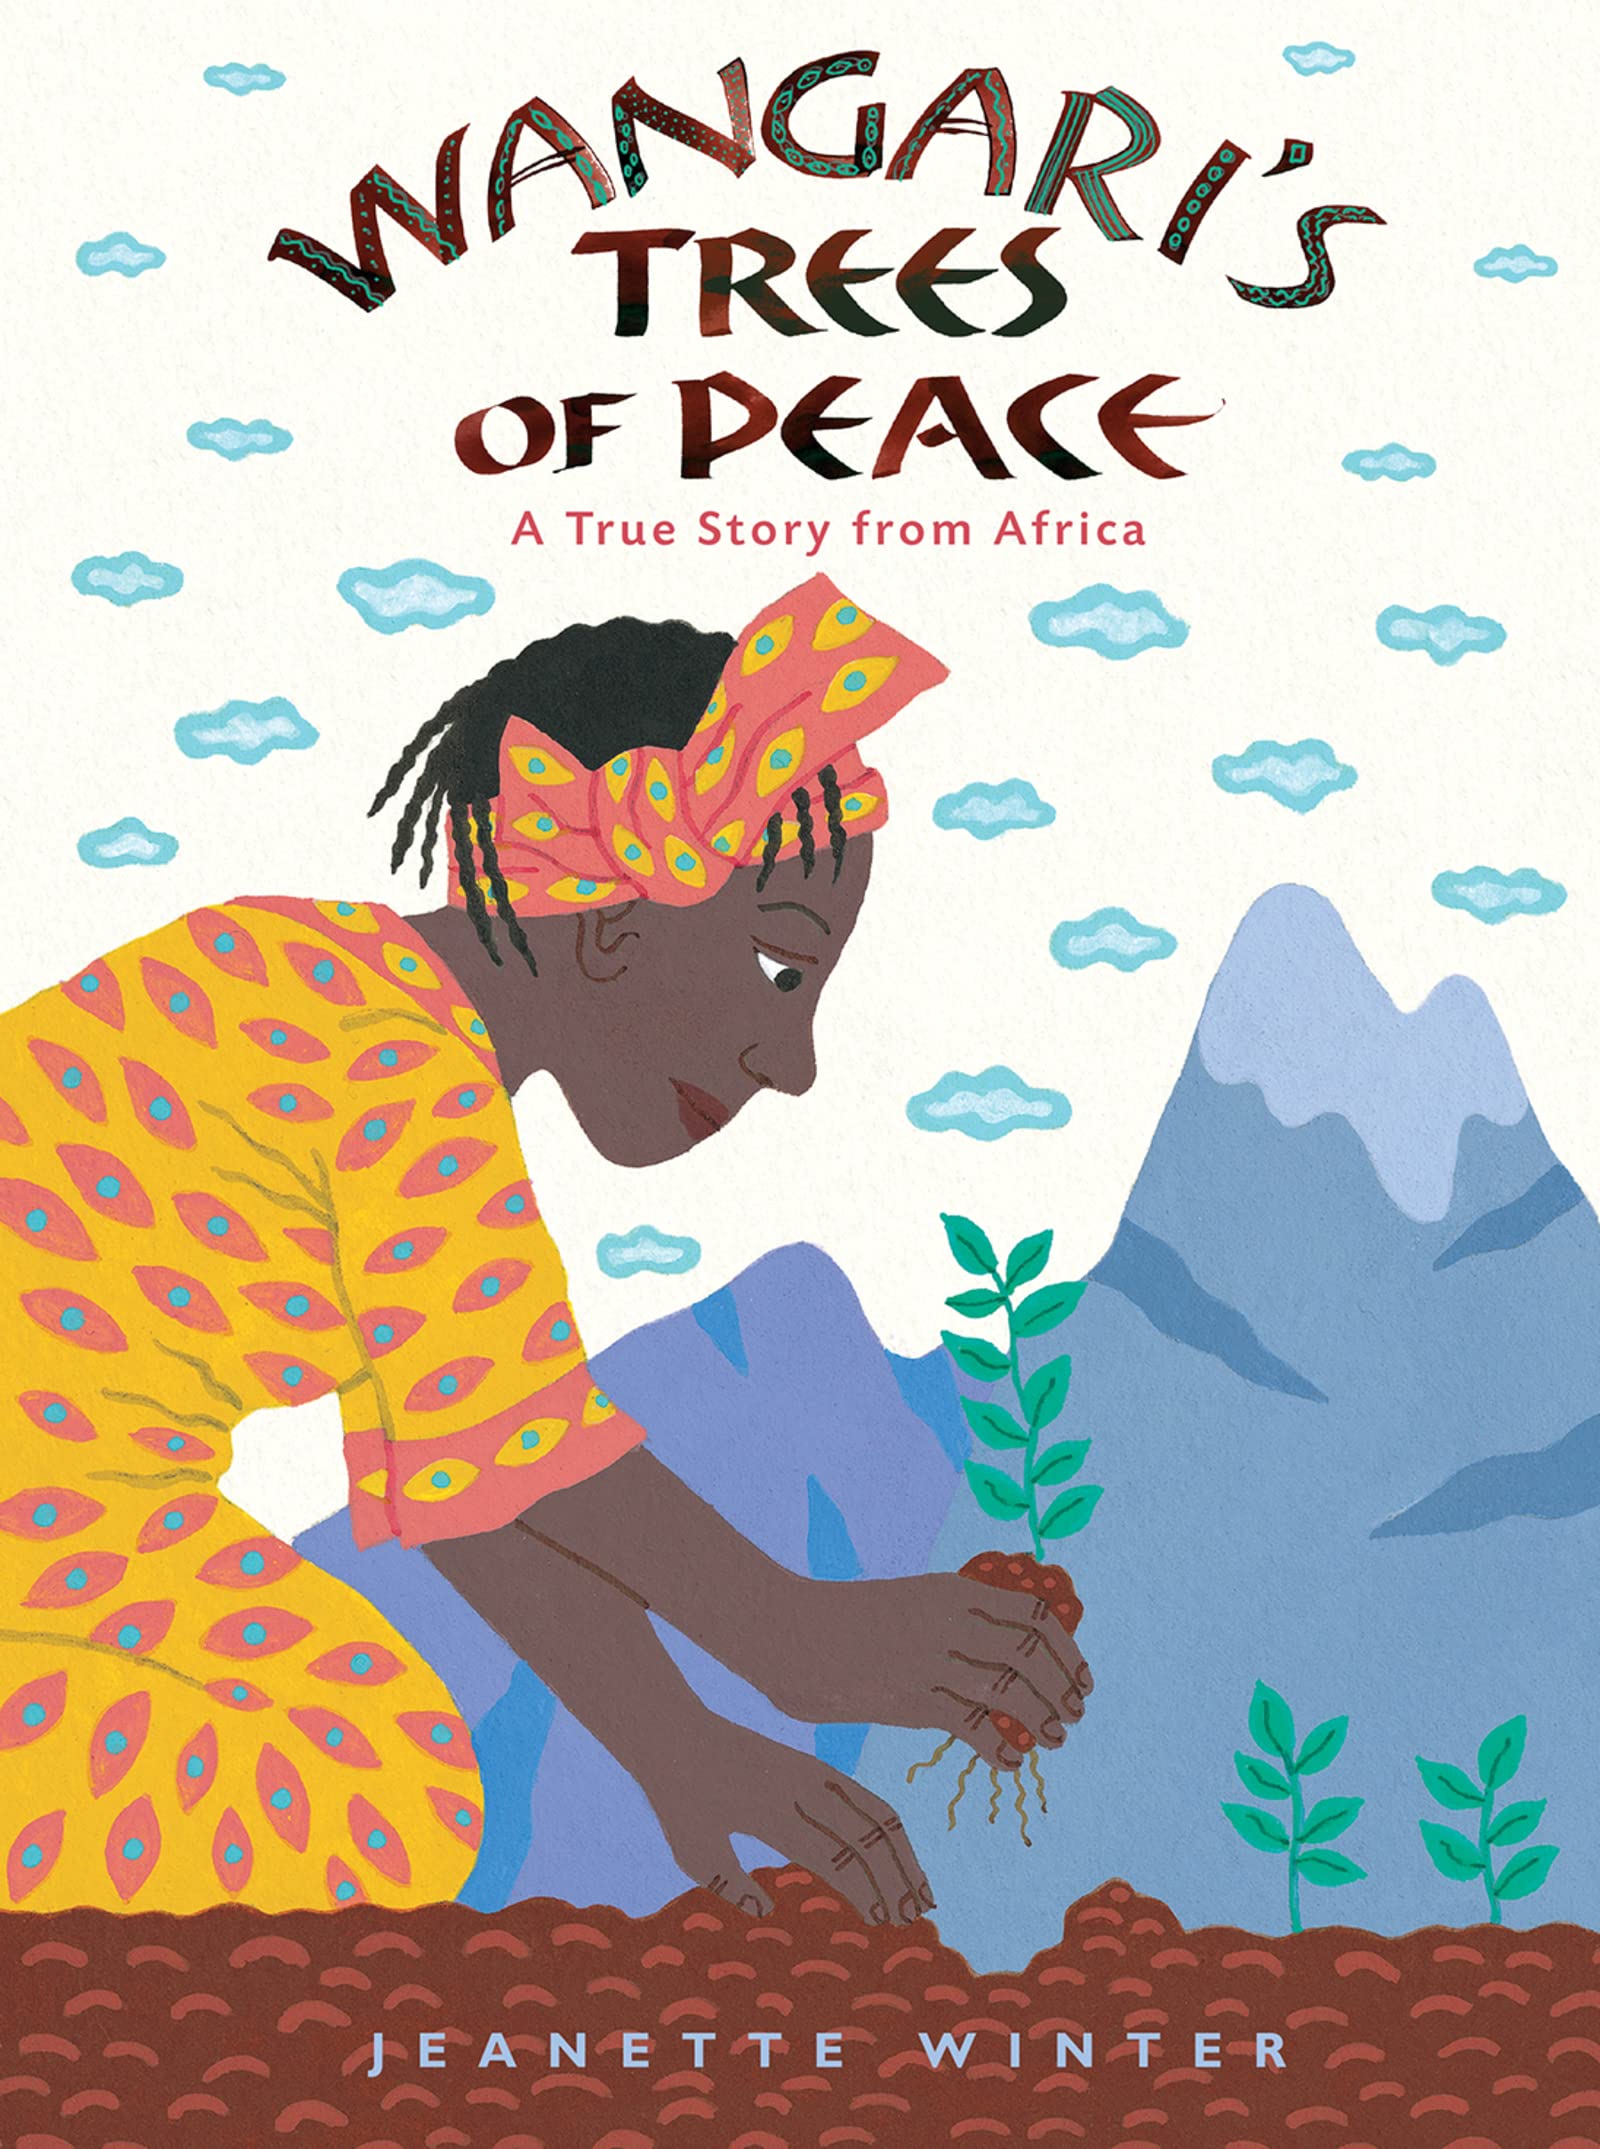 Cover of the book Wangari's Trees of Peace: A True Story From Africa. Features an illustration of Wangari dressed in yellow planting a tree with mountains in the background.